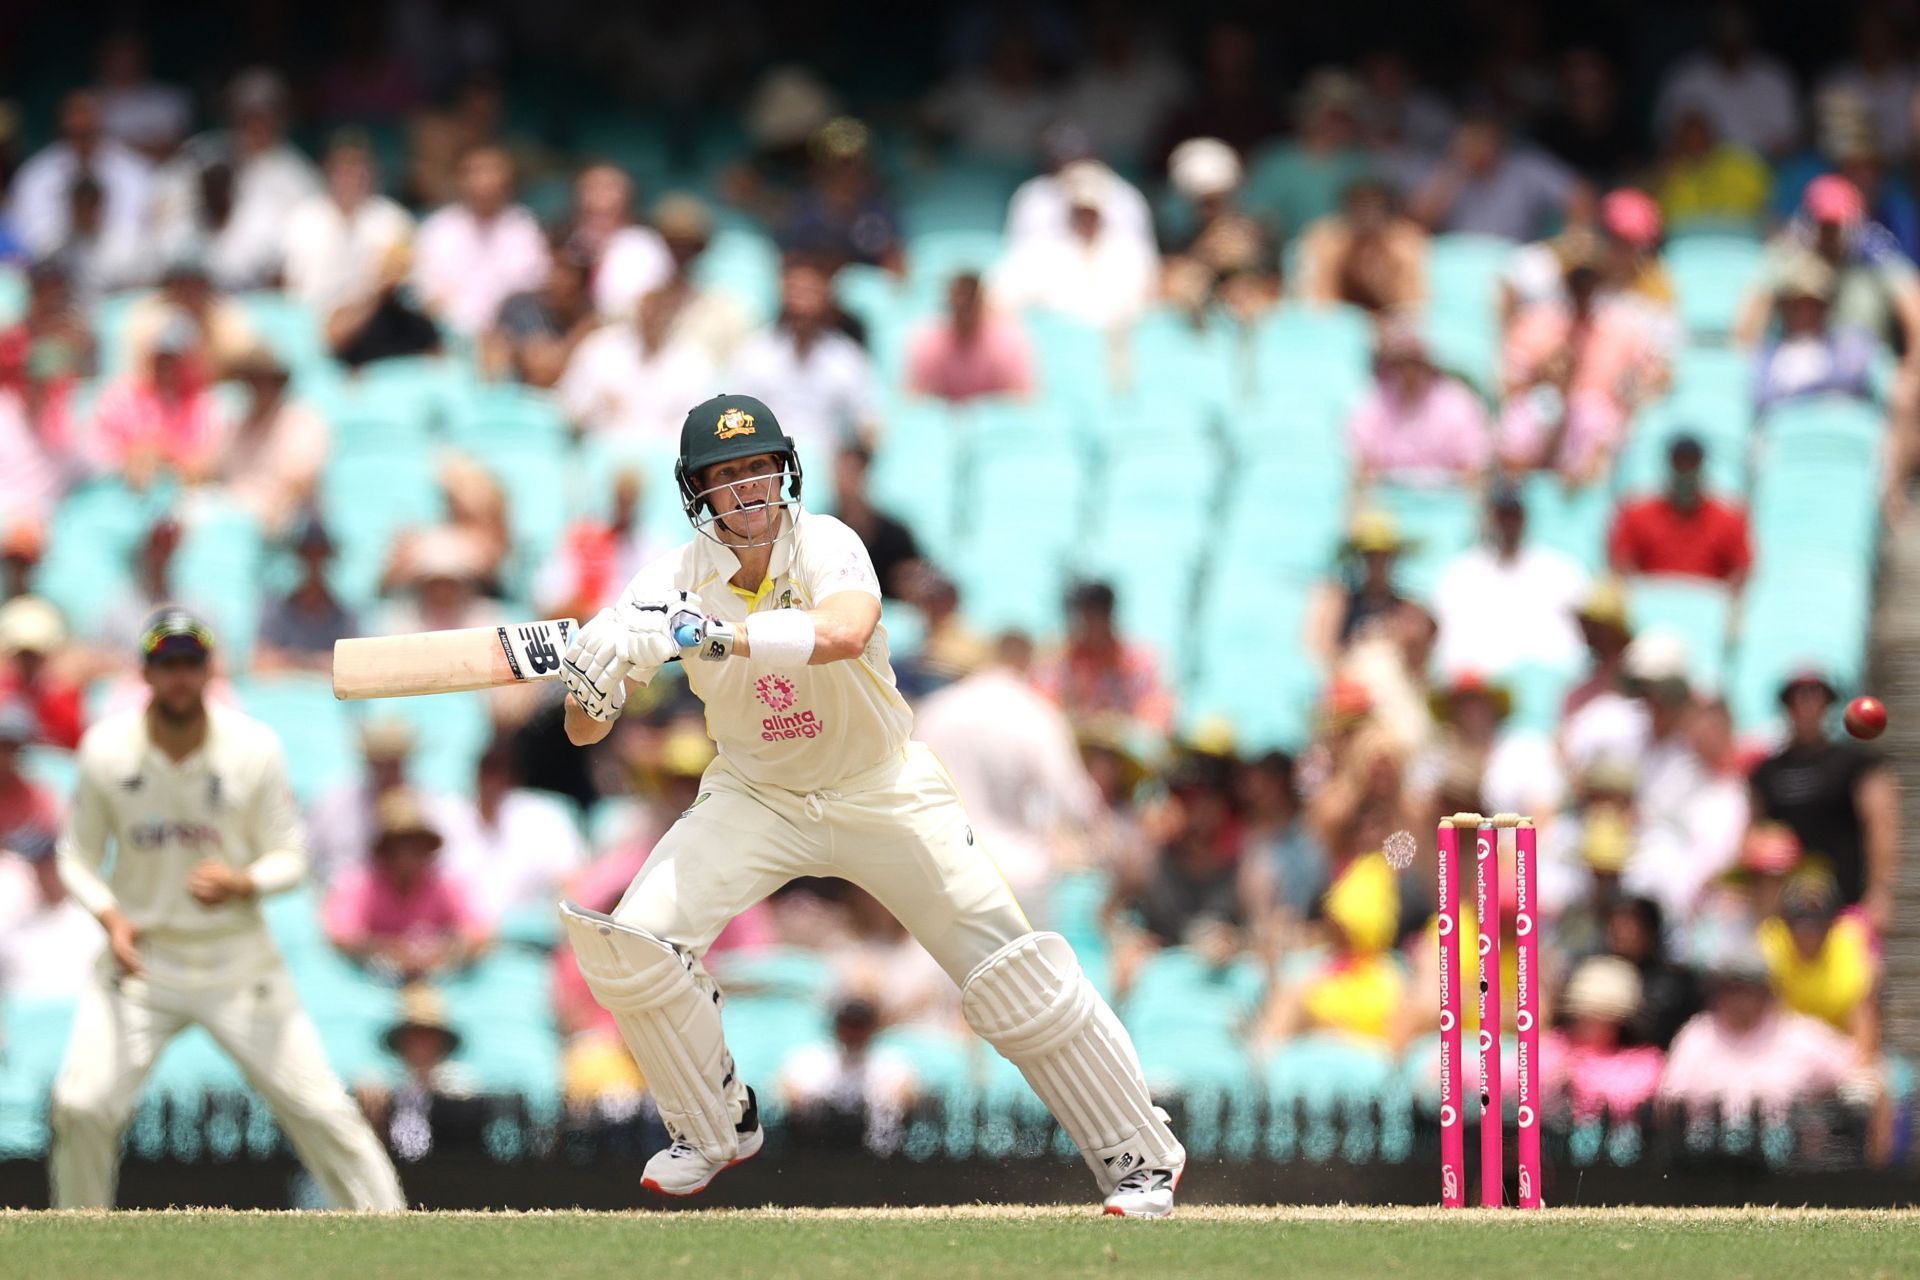 Steven Smith bats during the Sydney Test. Pic: Getty Images